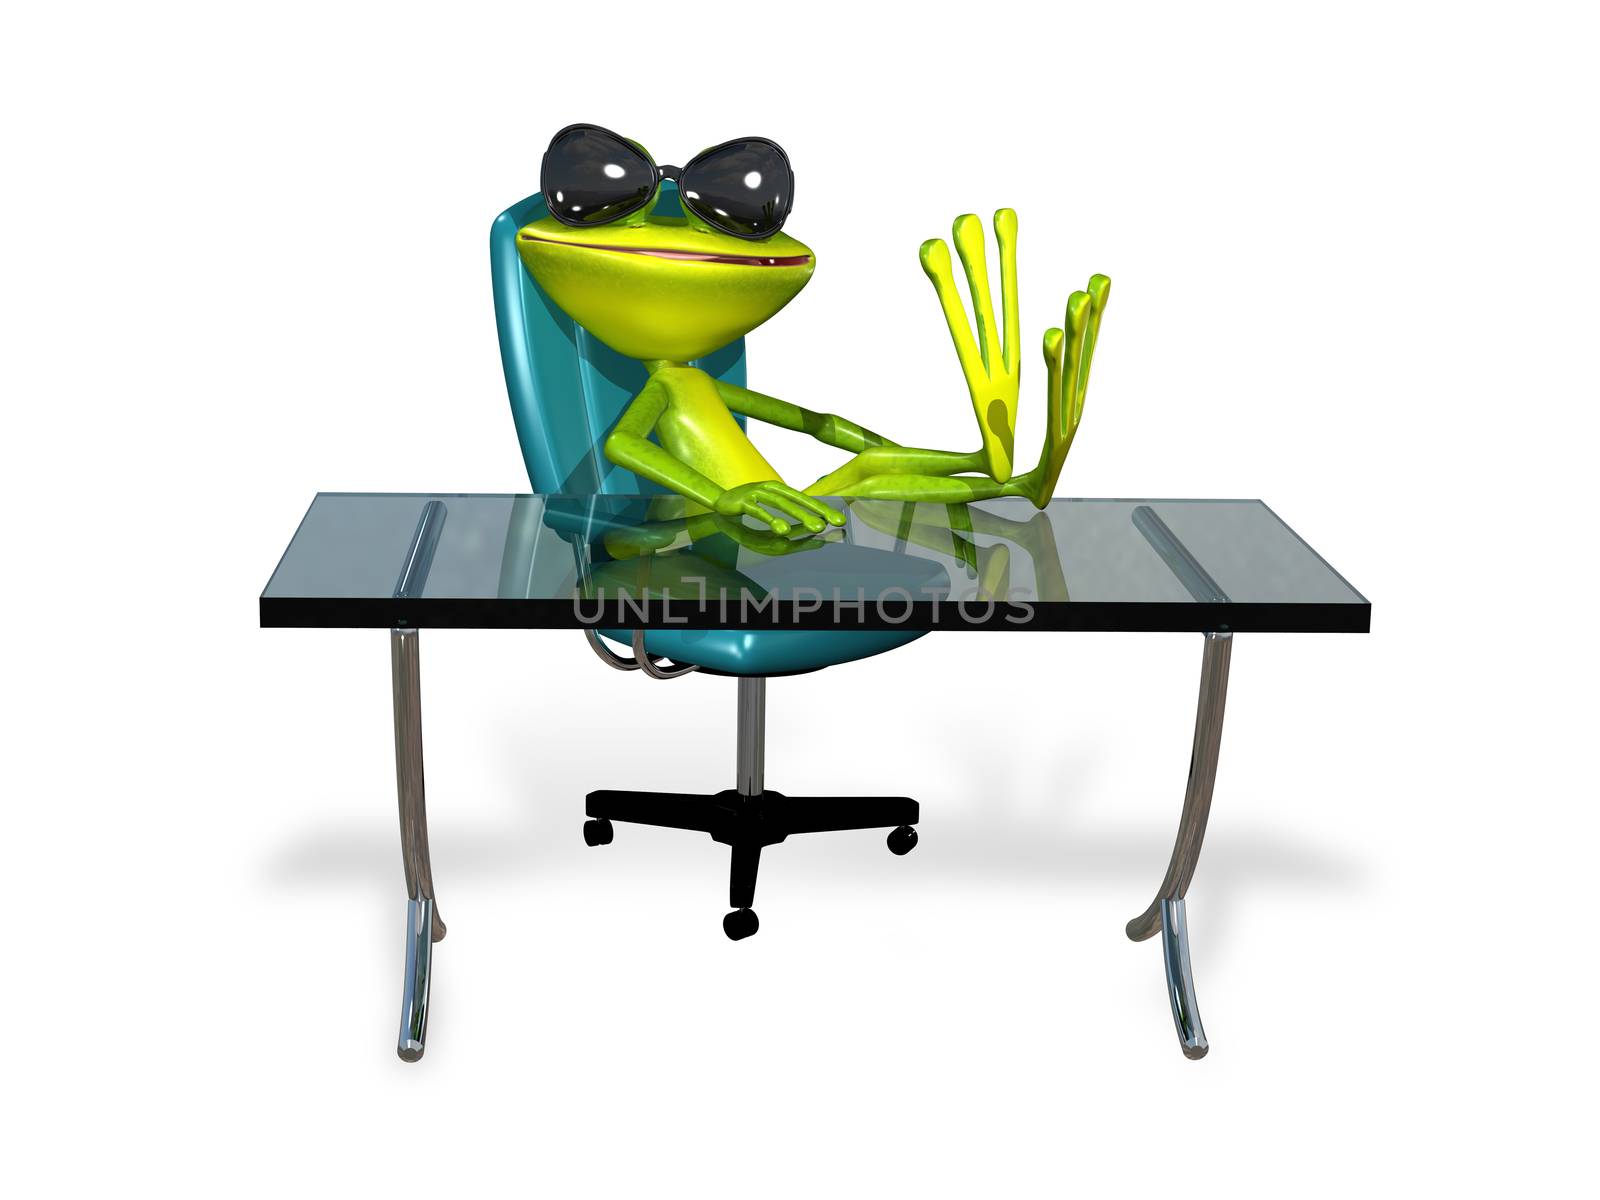 Frog at the table by brux